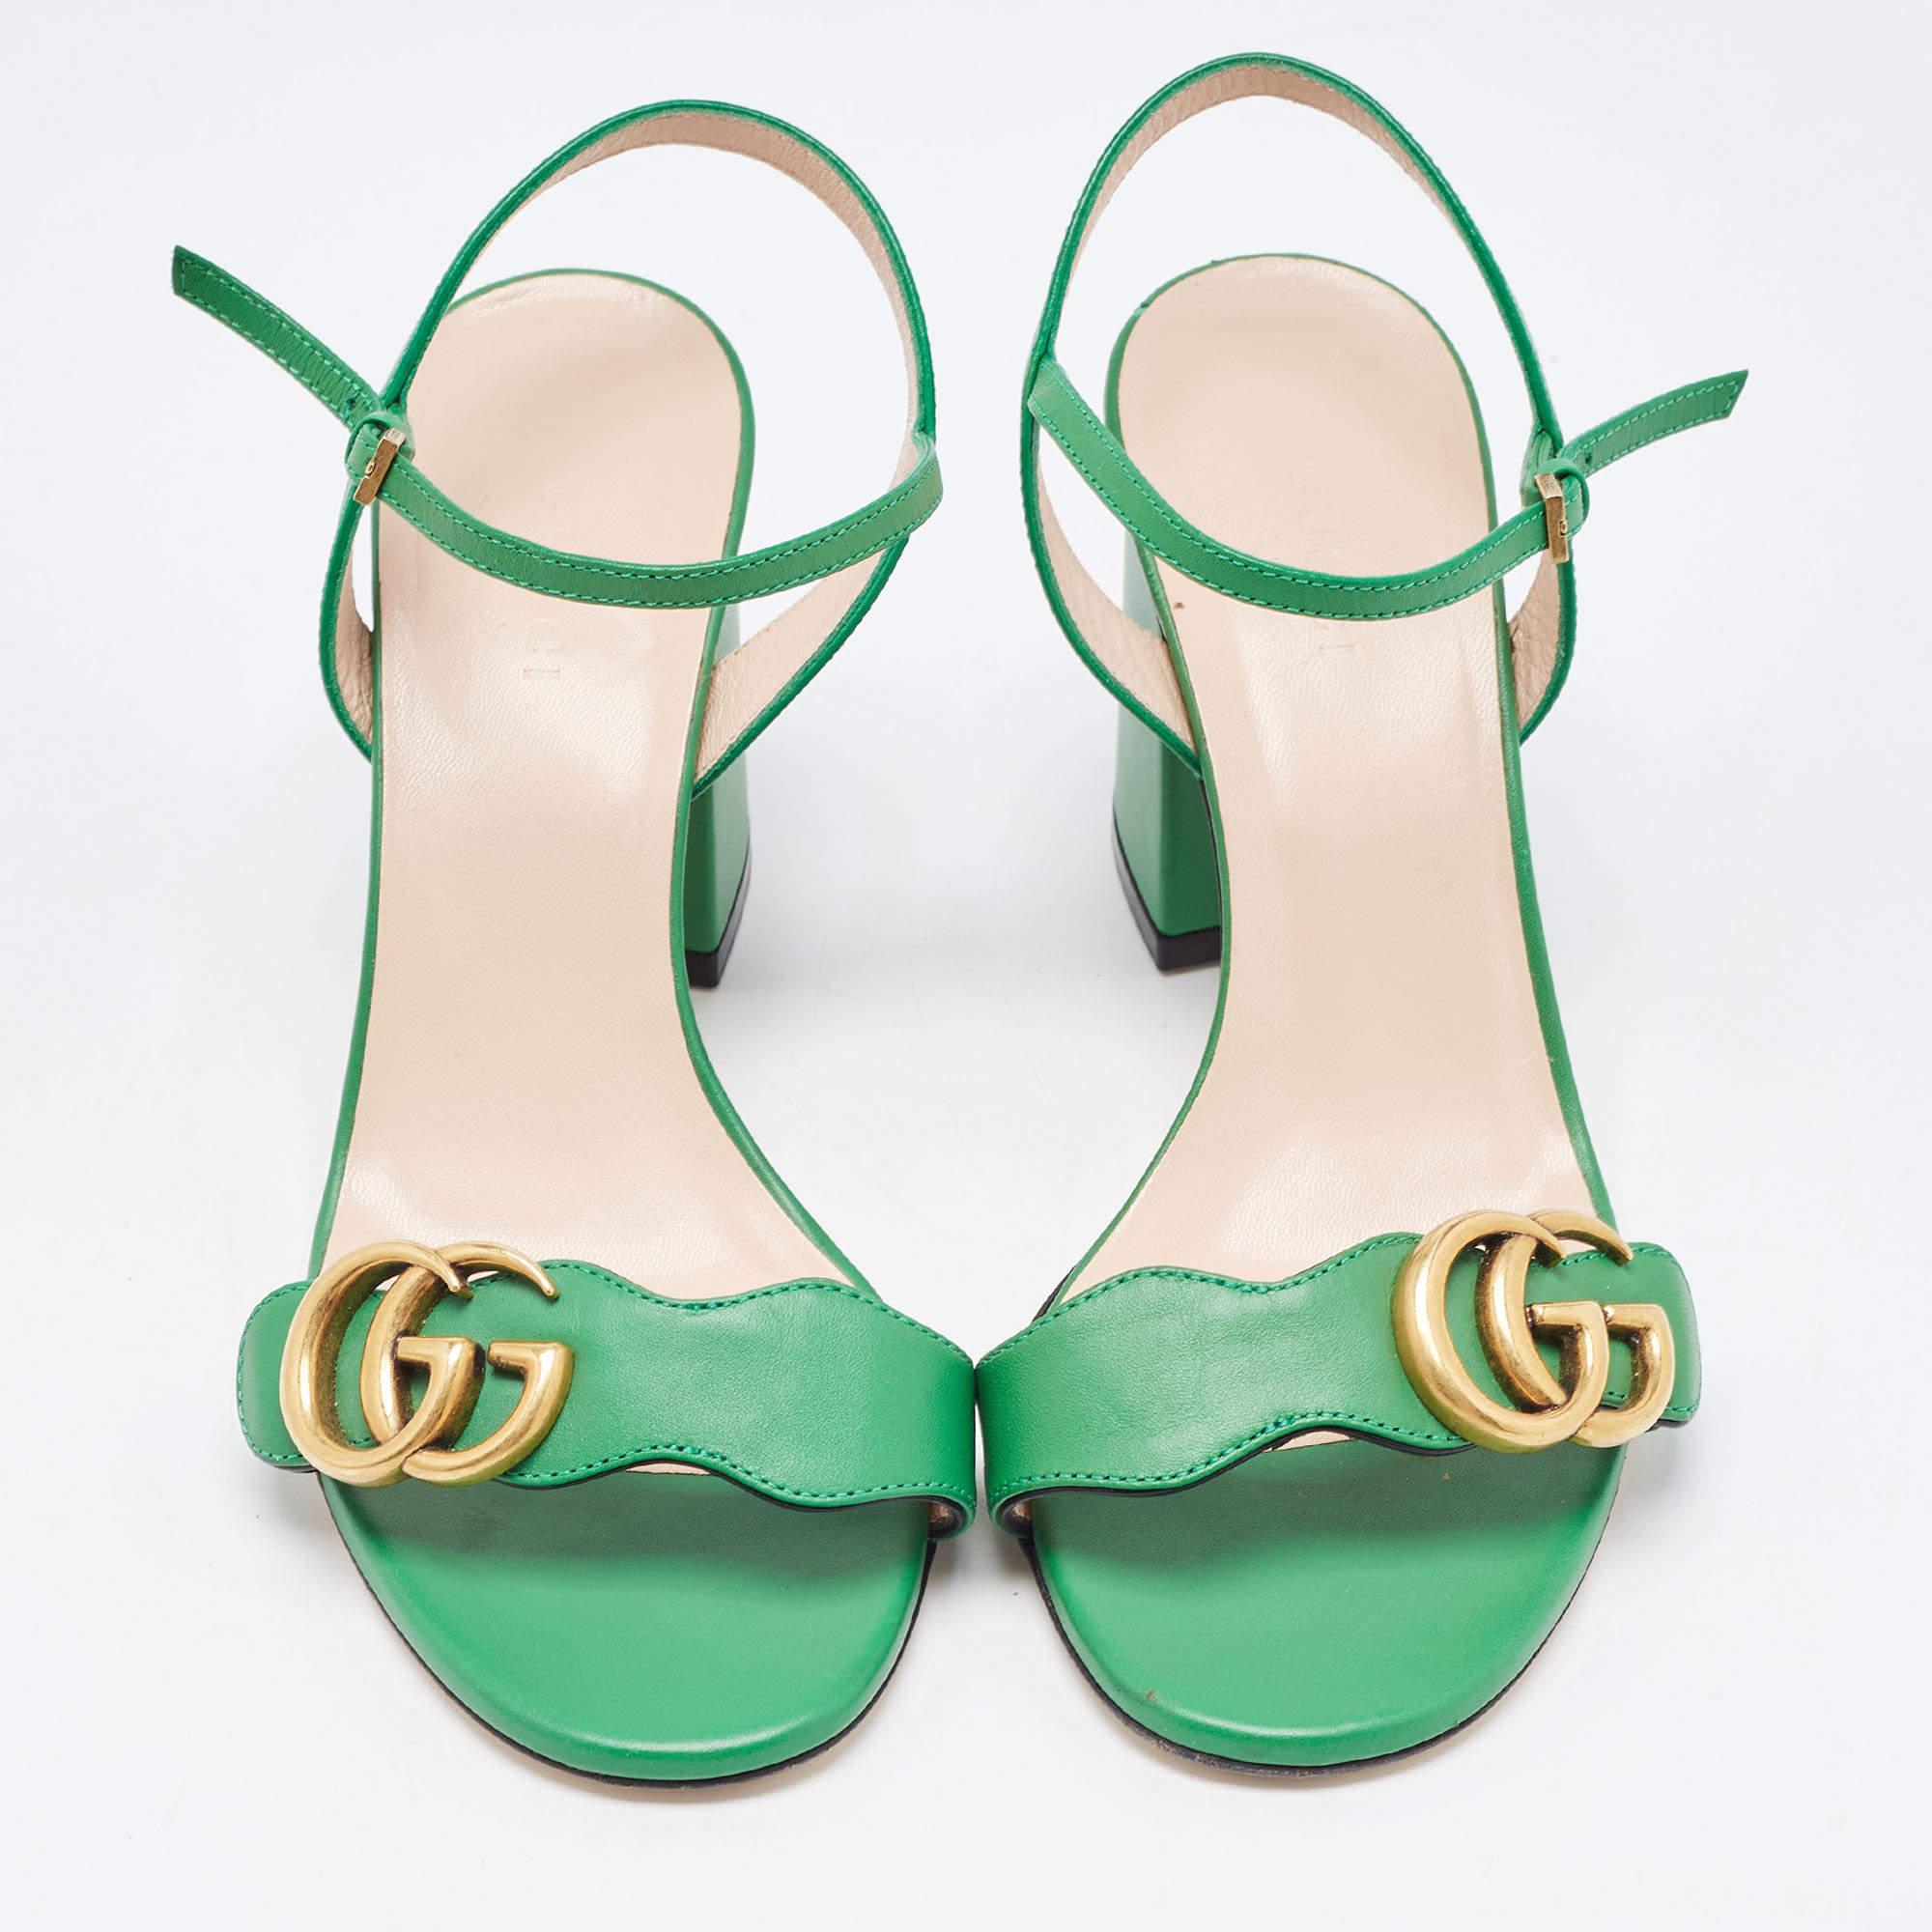 Women's Gucci Green Leather GG Marmont Block Heel Ankle Strap Sandals Size 36